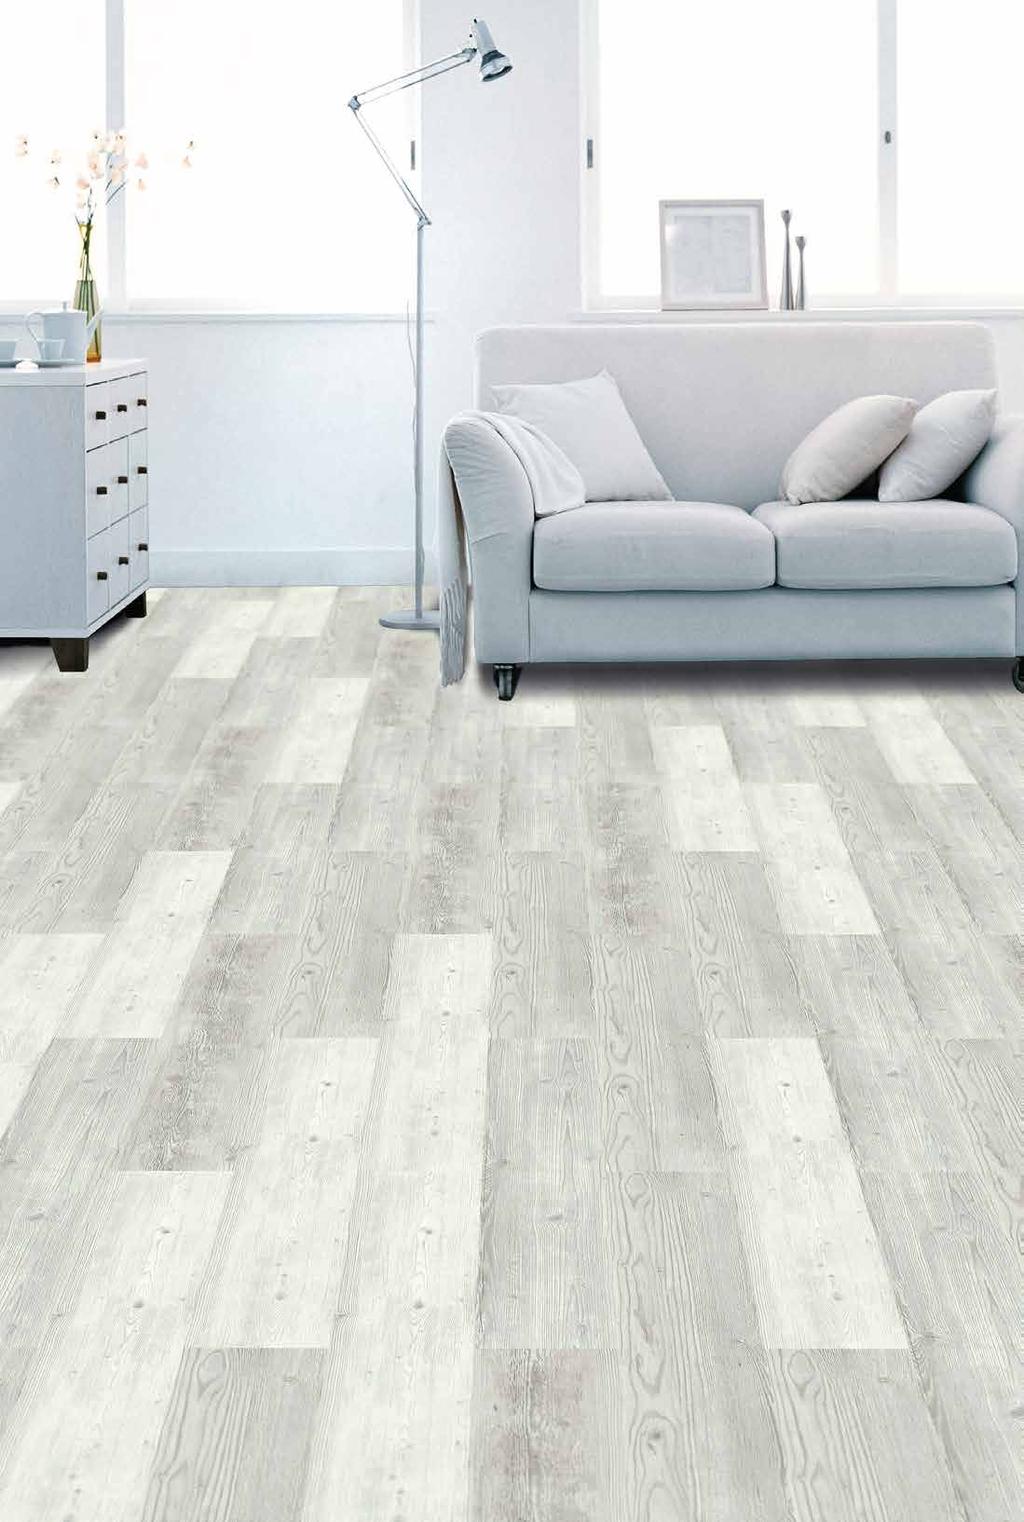 If you are looking for a floor that is quite easy to install, then you should opt to use the Ornato hybrid waterproof floor.